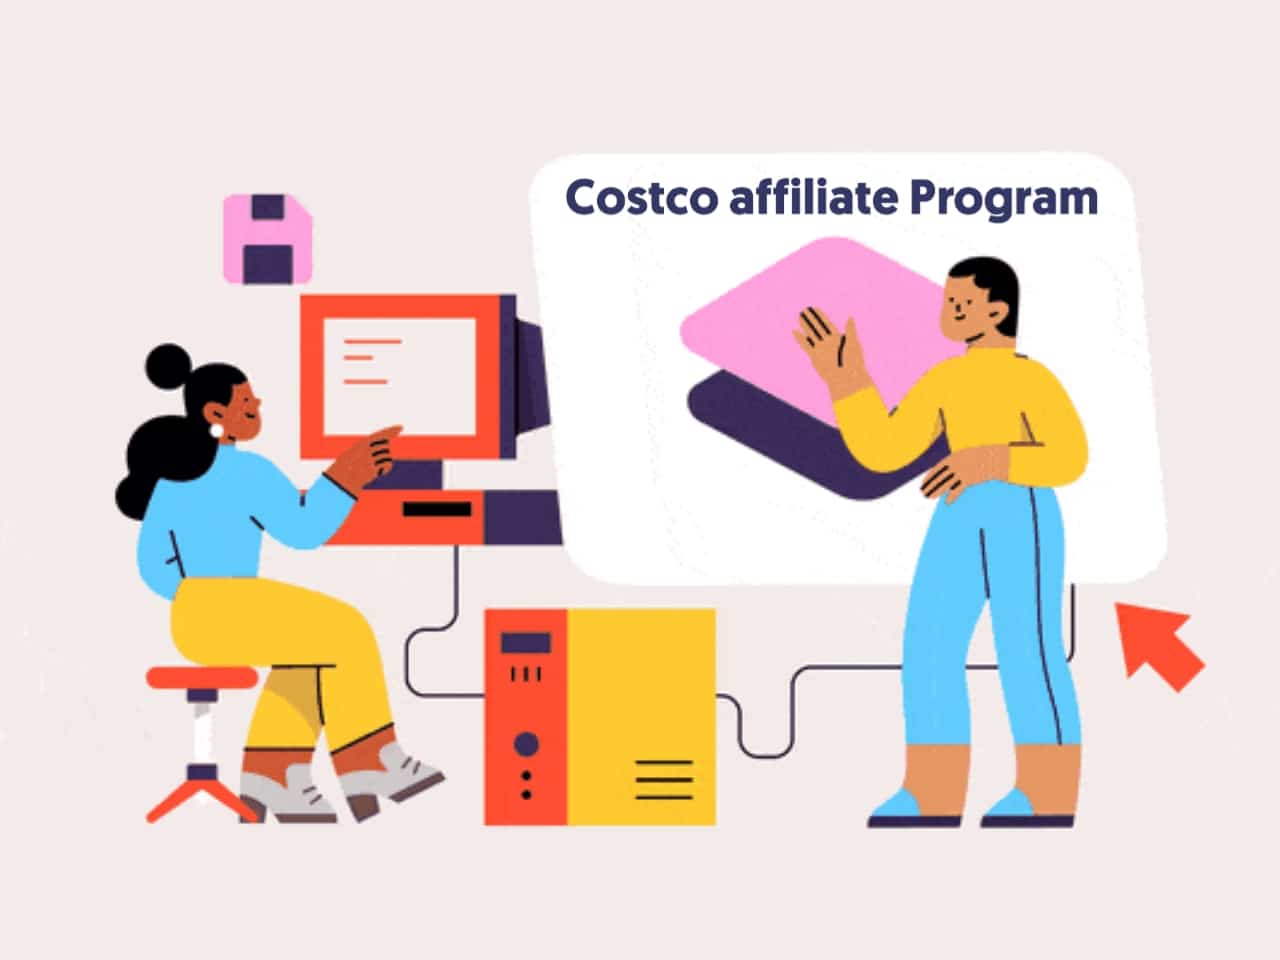 Pros and cons of Costco affiliate program